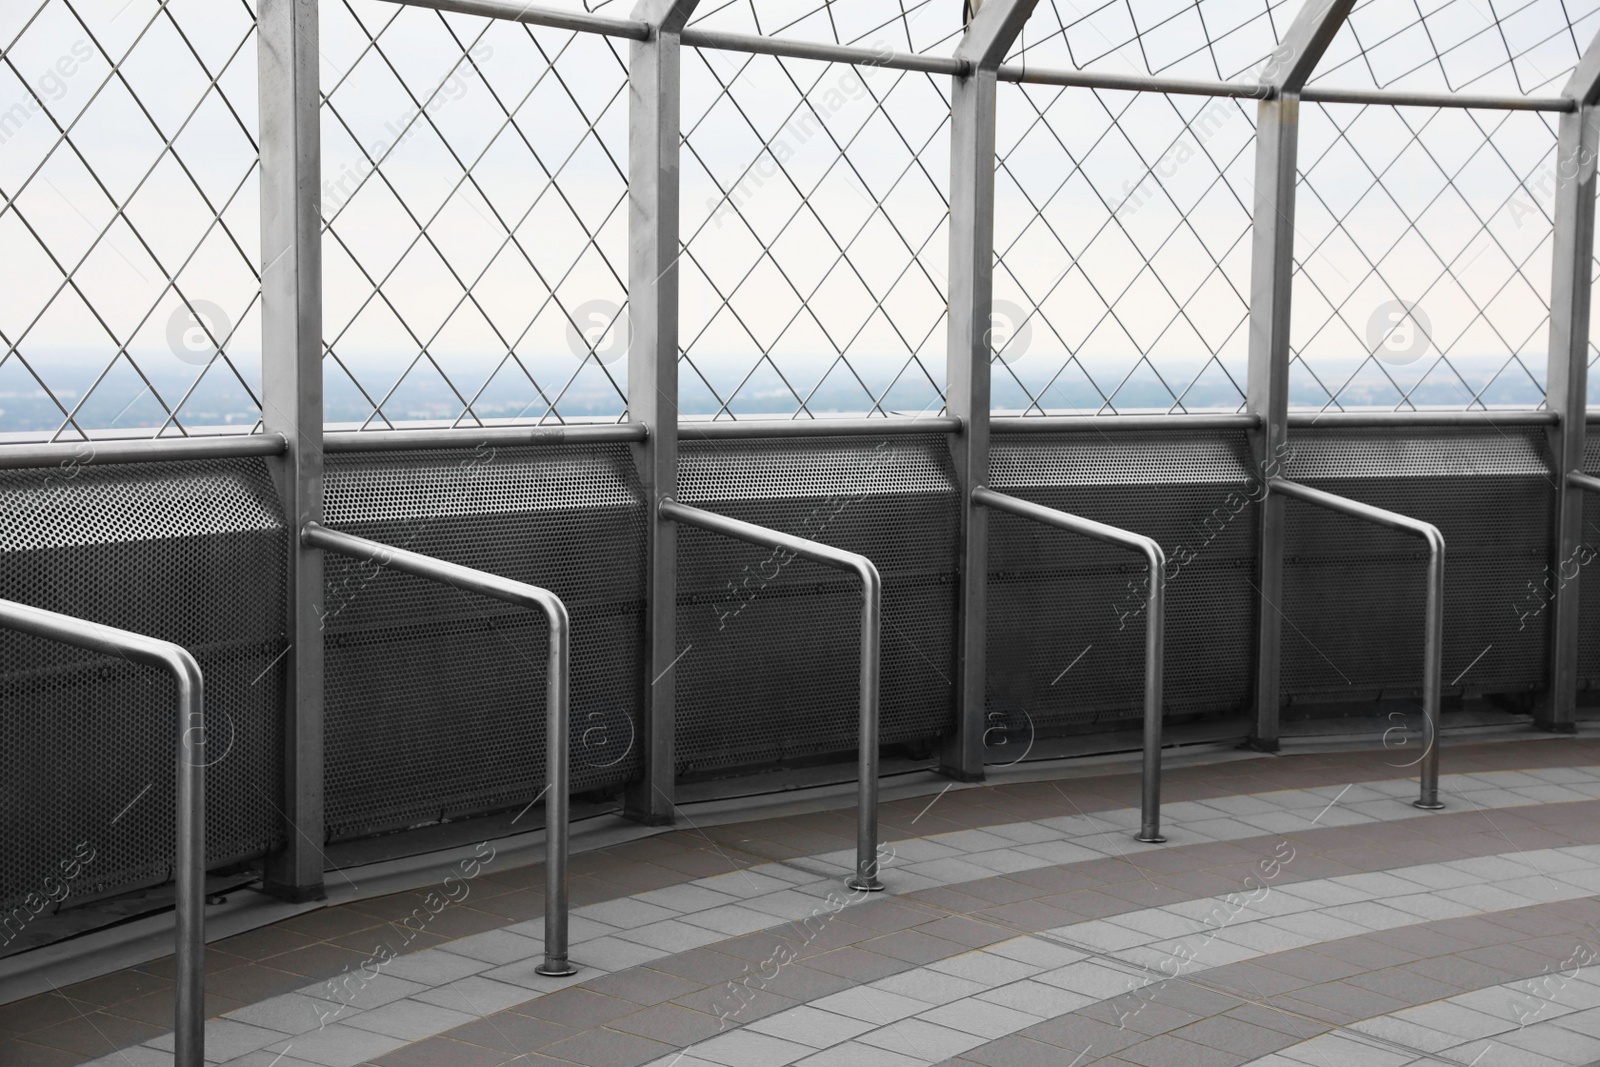 Photo of Enclosed observation deck equipped with metal handrails